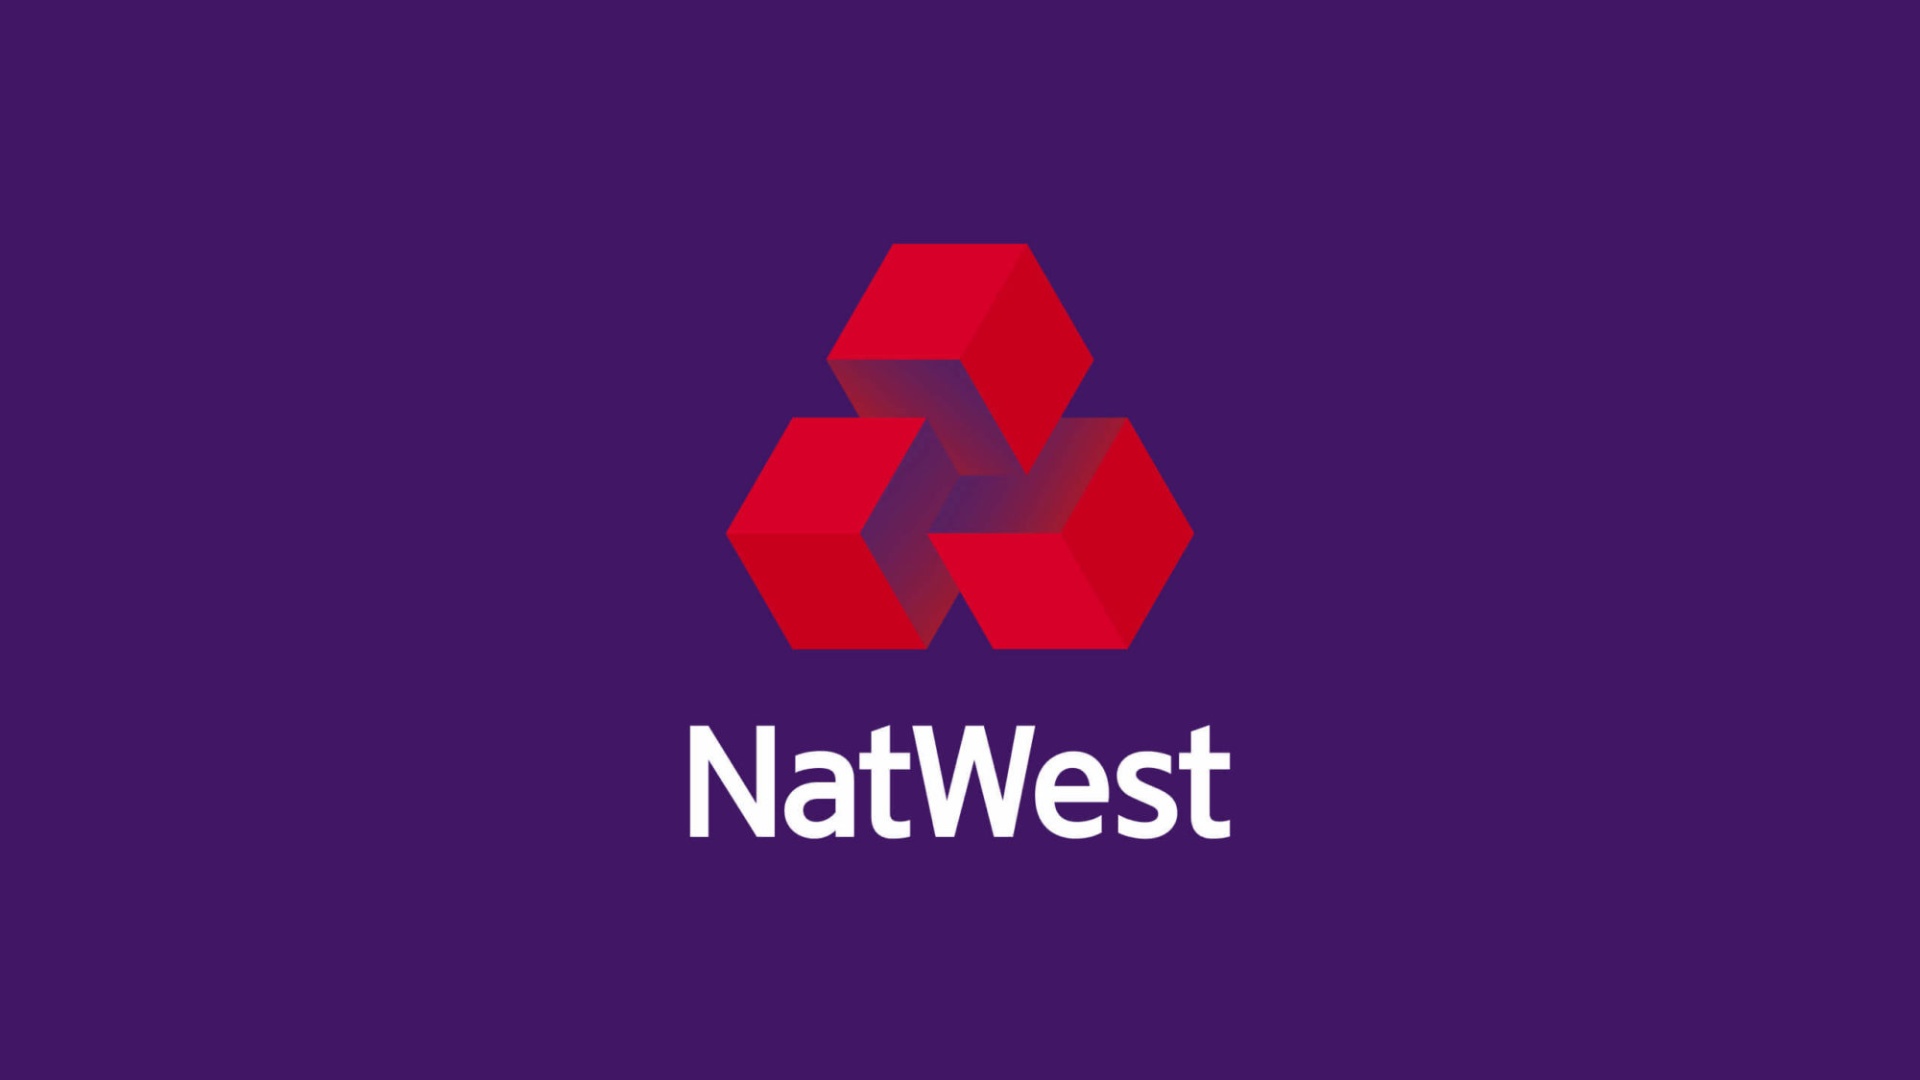 Natwest Card - See How to Apply